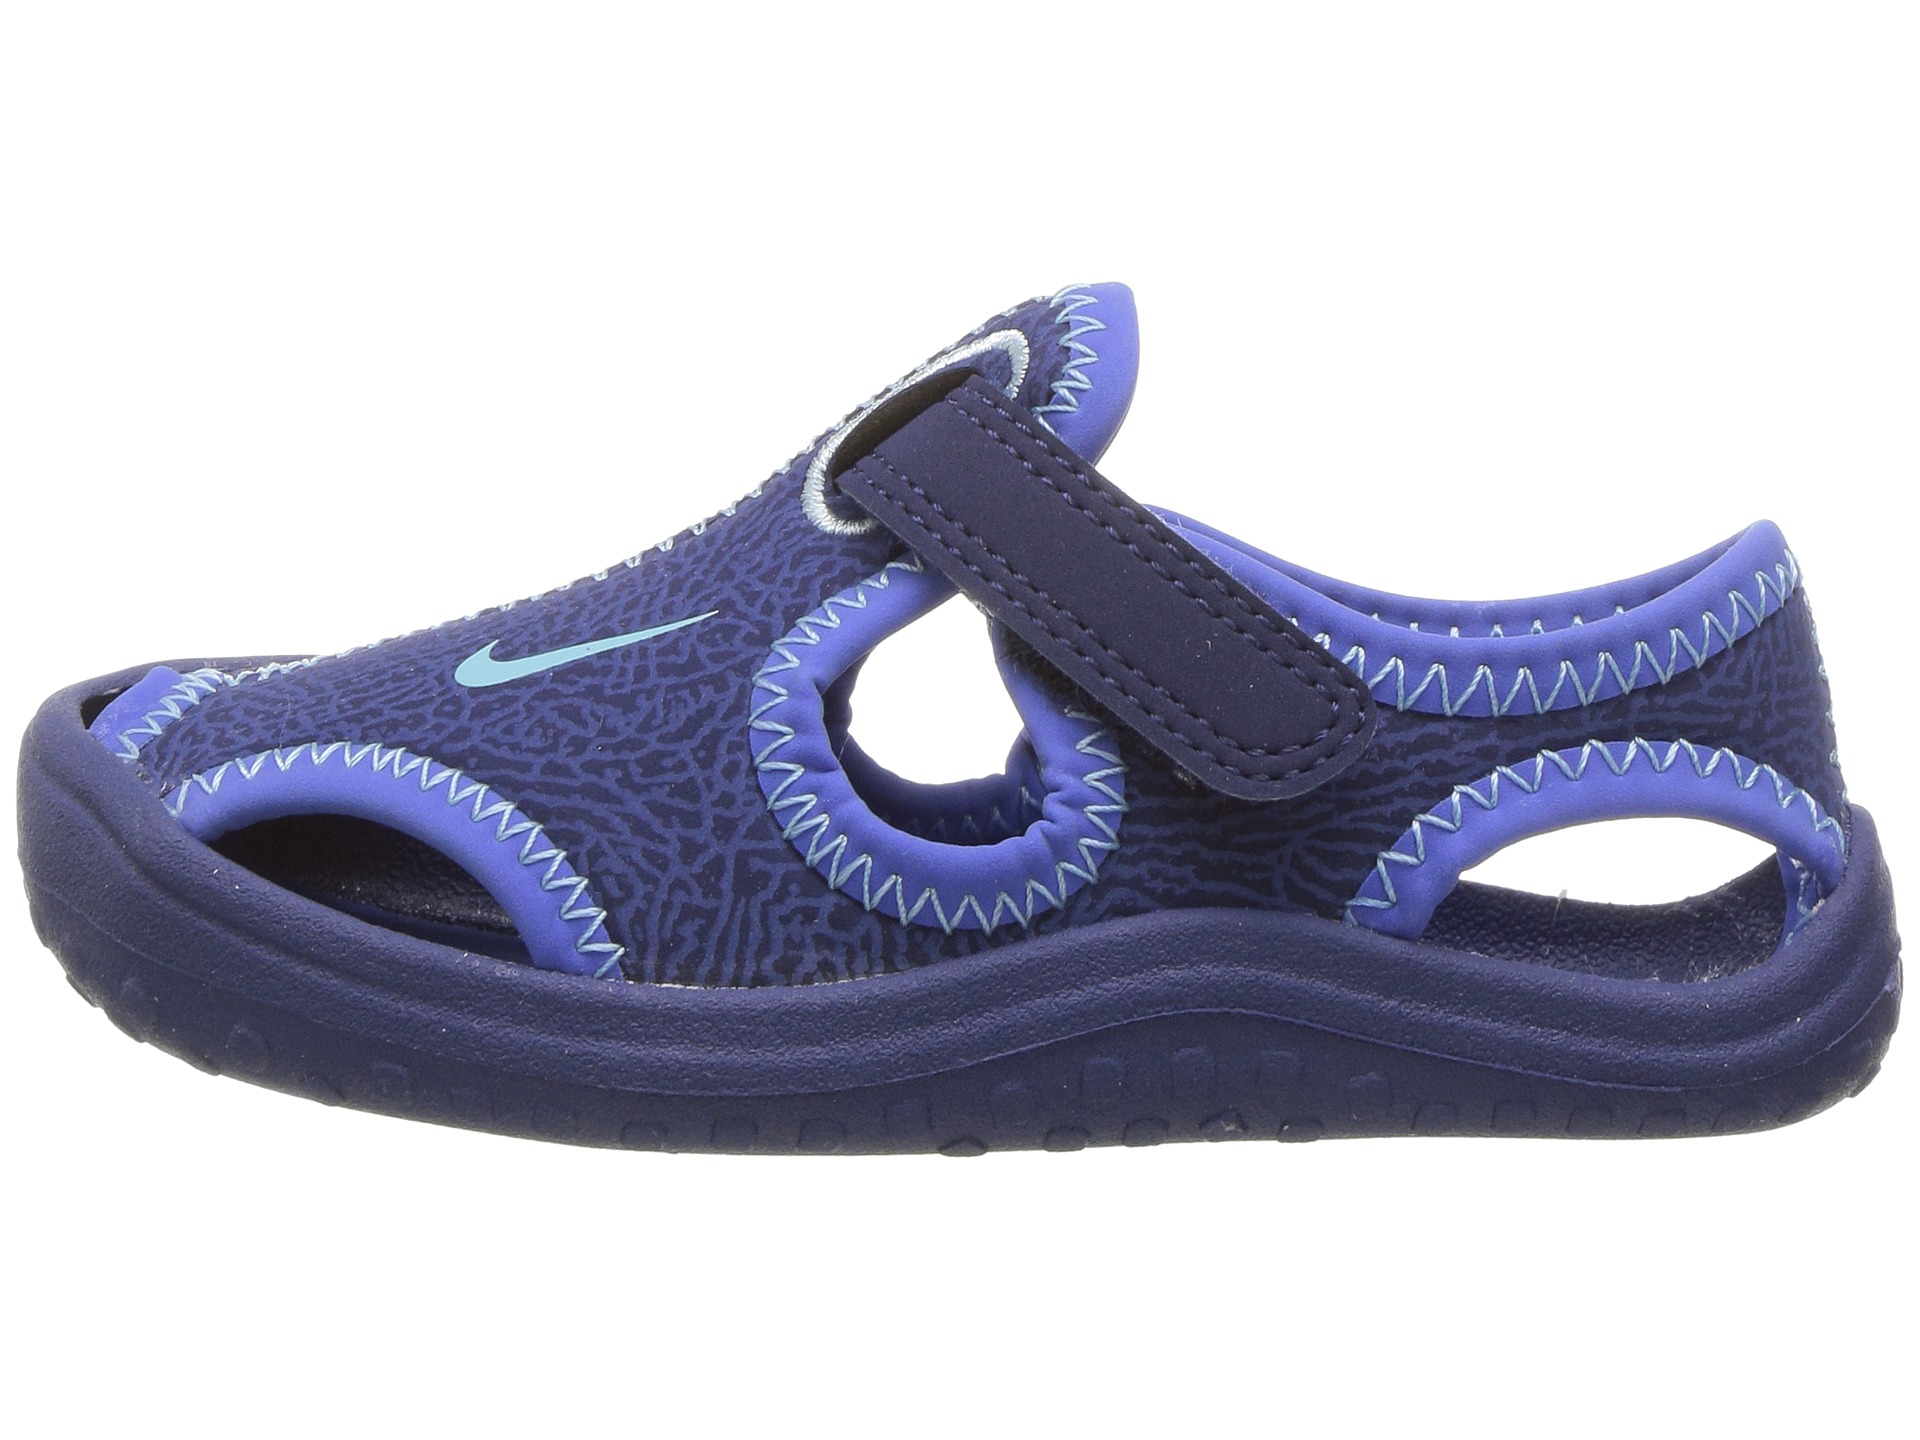 Nike Kids Sunray Protect (Infant/Toddler) at Zappos.com